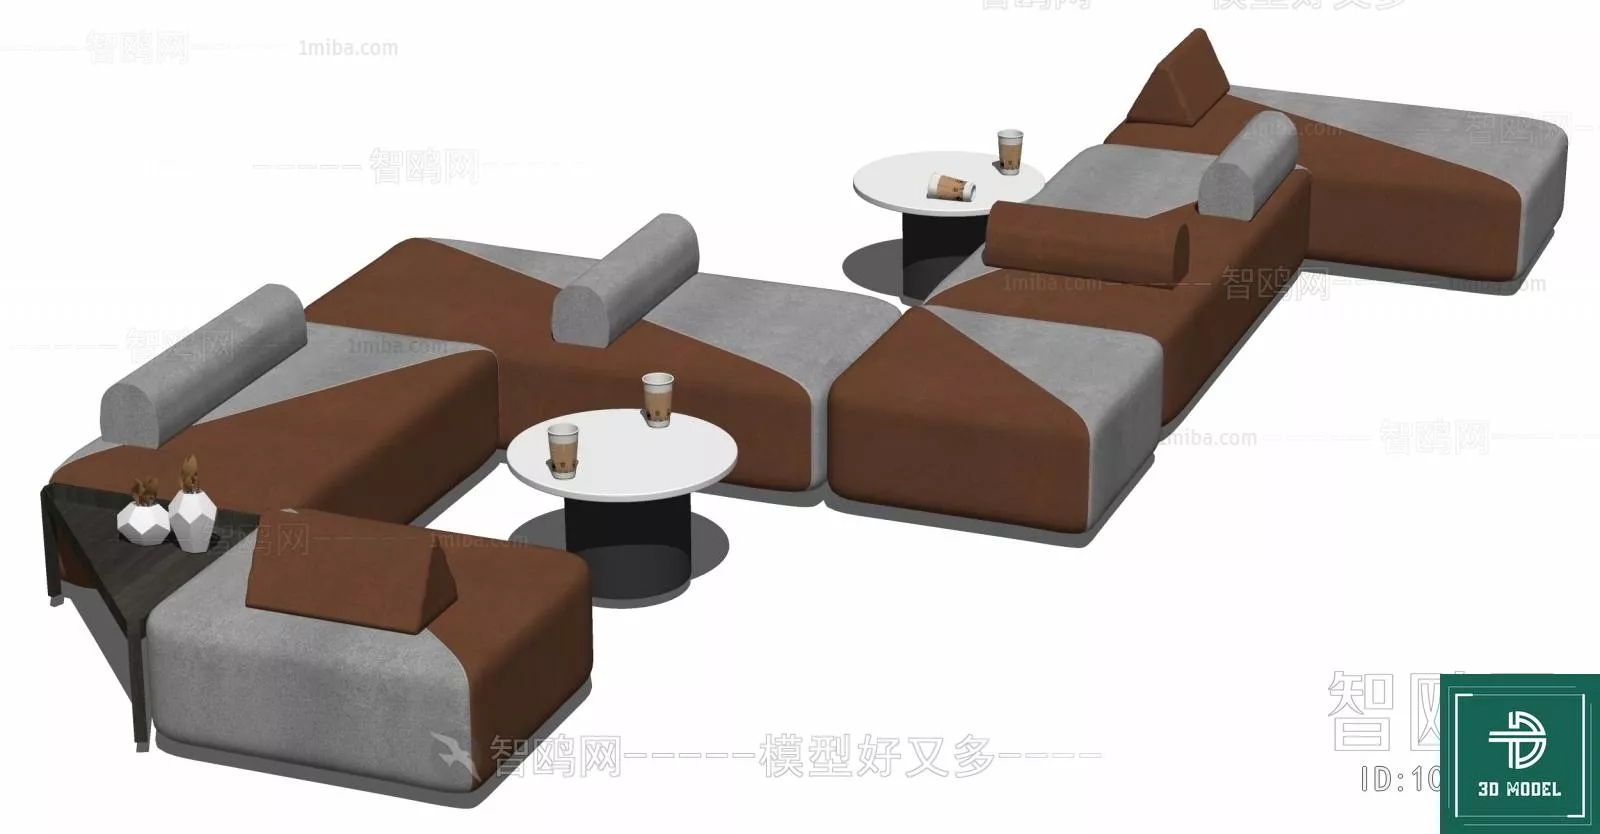 MODERN SOFA - SKETCHUP 3D MODEL - VRAY OR ENSCAPE - ID13190